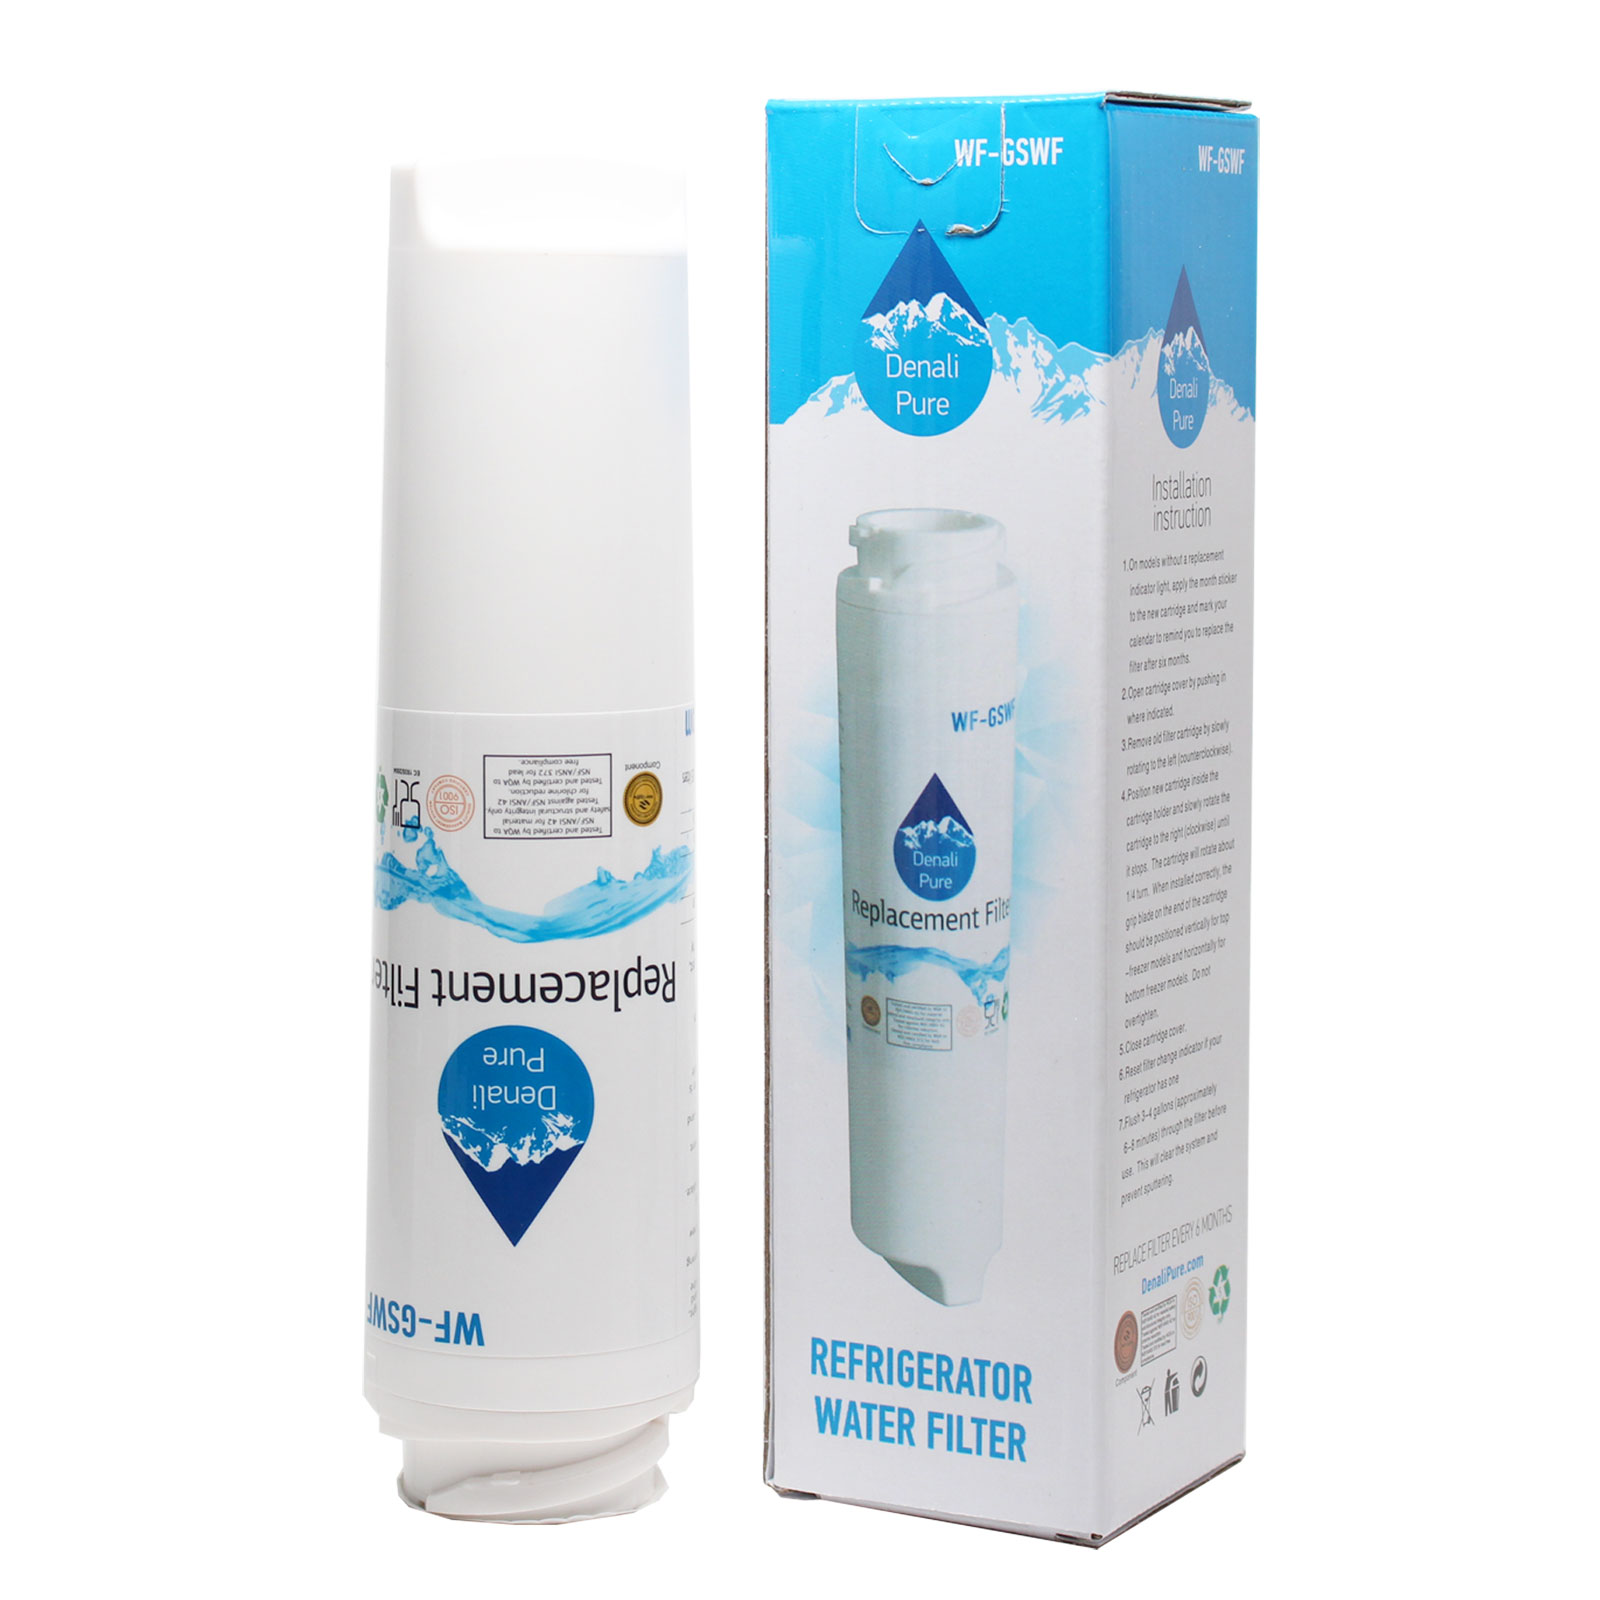 Compatible General Electric PFCF1NJXCBB Refrigerator Water Filter - Compatible General Electric GSWF Fridge Water Filter Cartridge - image 1 of 3